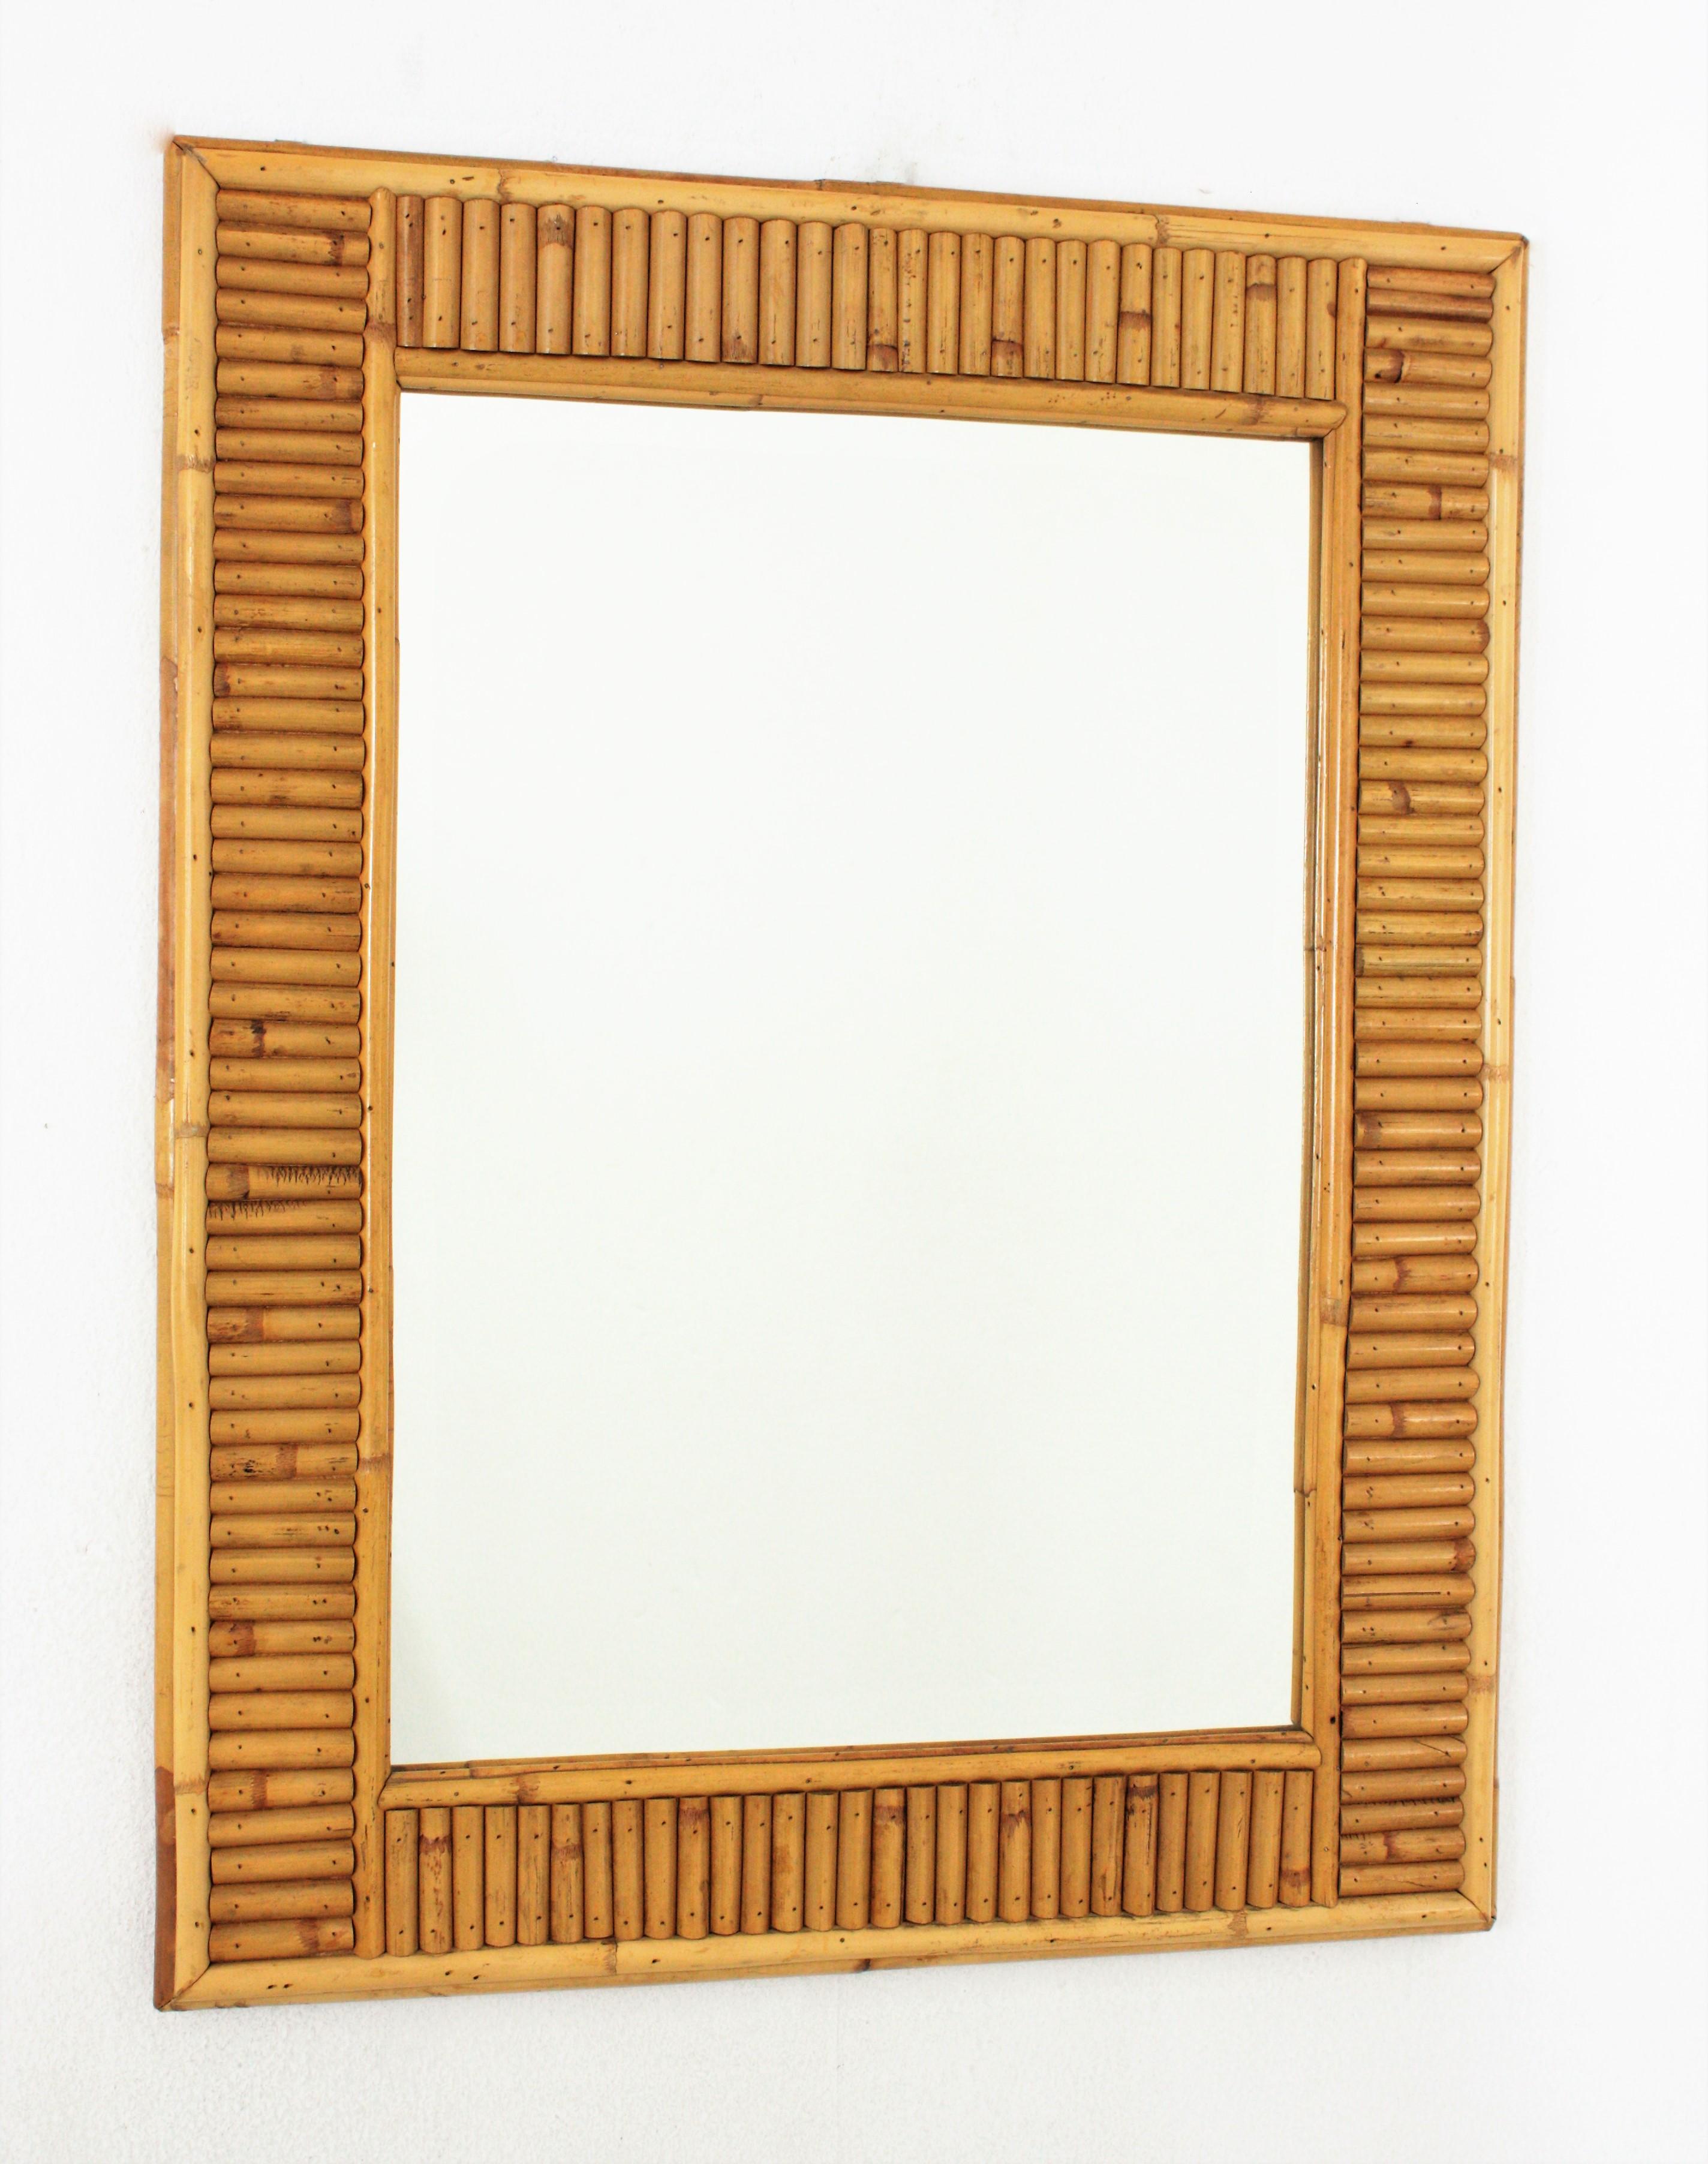 Italian Designer Midentury wall mirror, split reed, bamboo, rattan, Italy, 1960s.
This cool rectangular mirror was handcrafted with bamboo cane and rattan. Its design combines Midcentury and Oriental accents.
It will be a nice addition to be used in